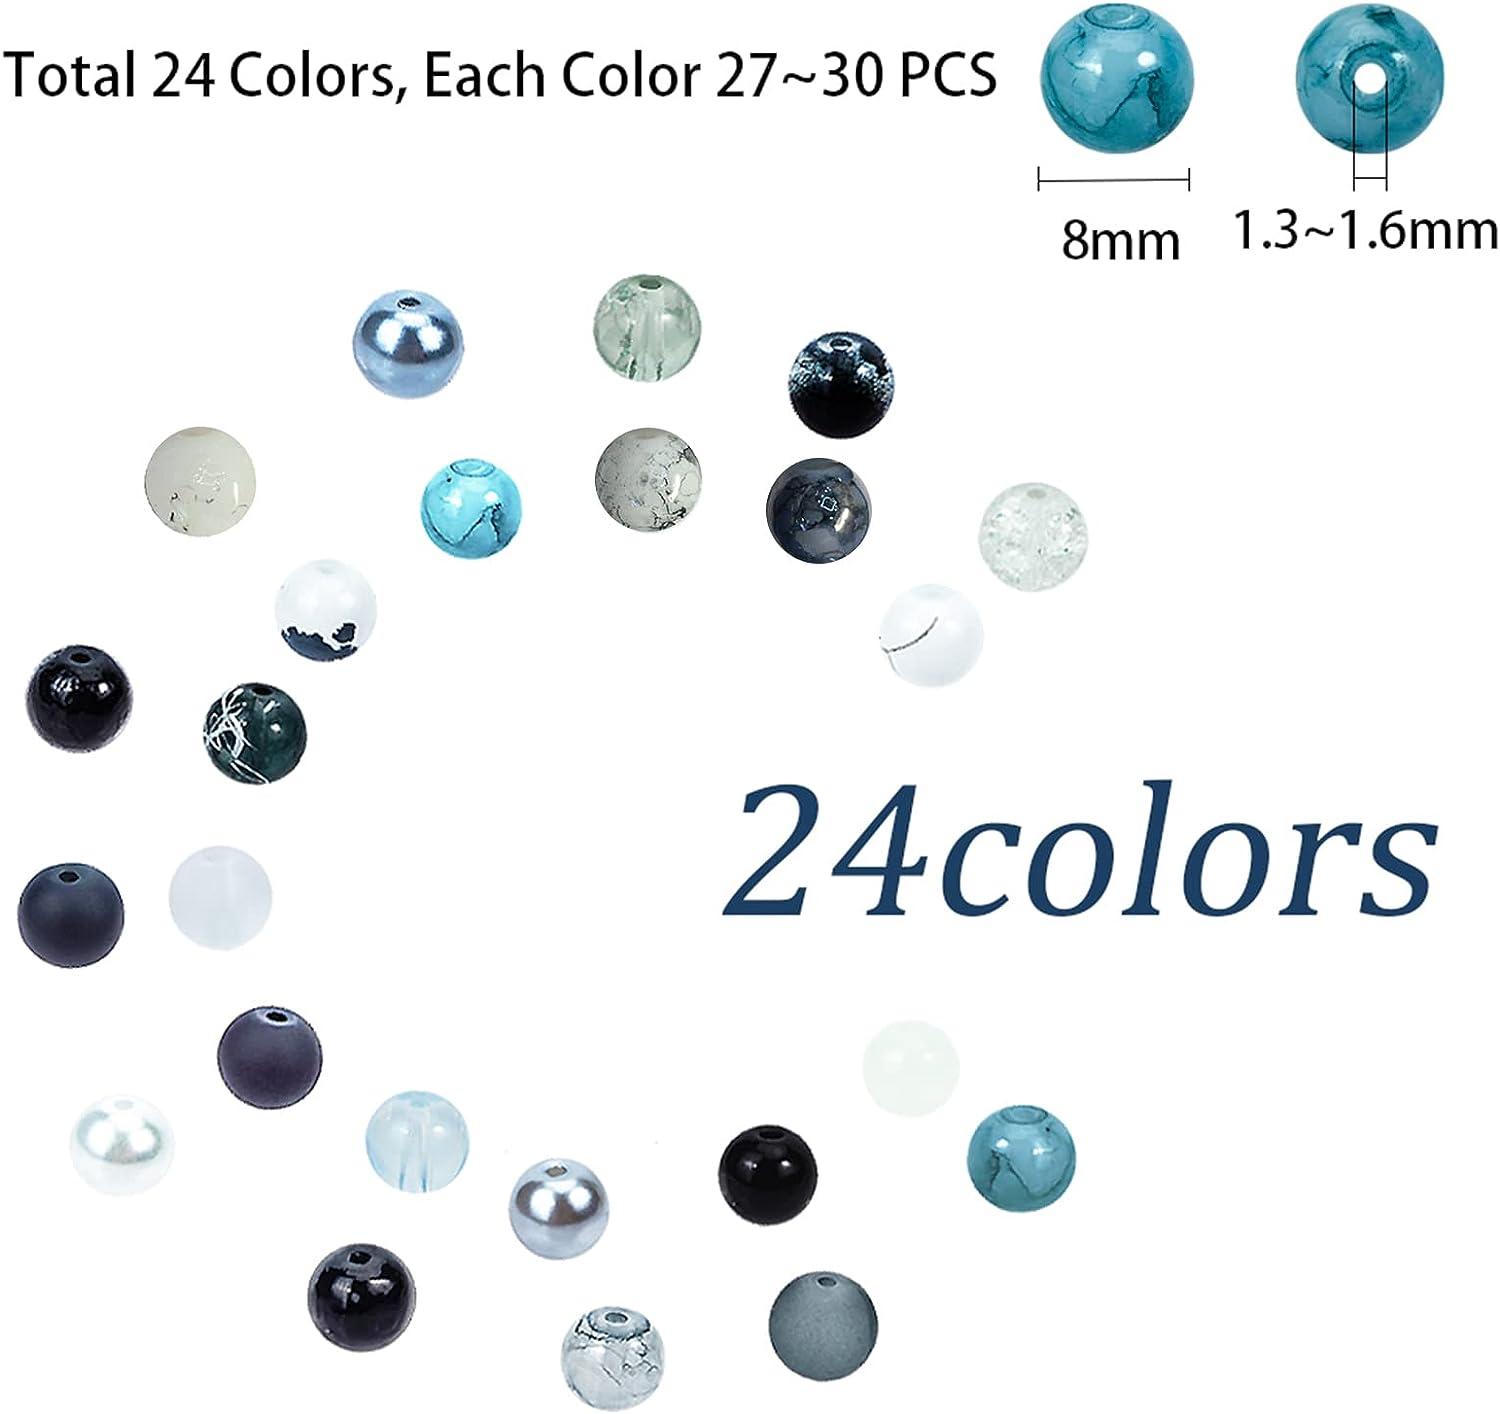 PH PandaHall 1440pcs 6mm Glass Beads for Bracelet Jewelry Making 24 Color  Purple Beads Round Loose Beads Craft Beads for Friendship Bracelets